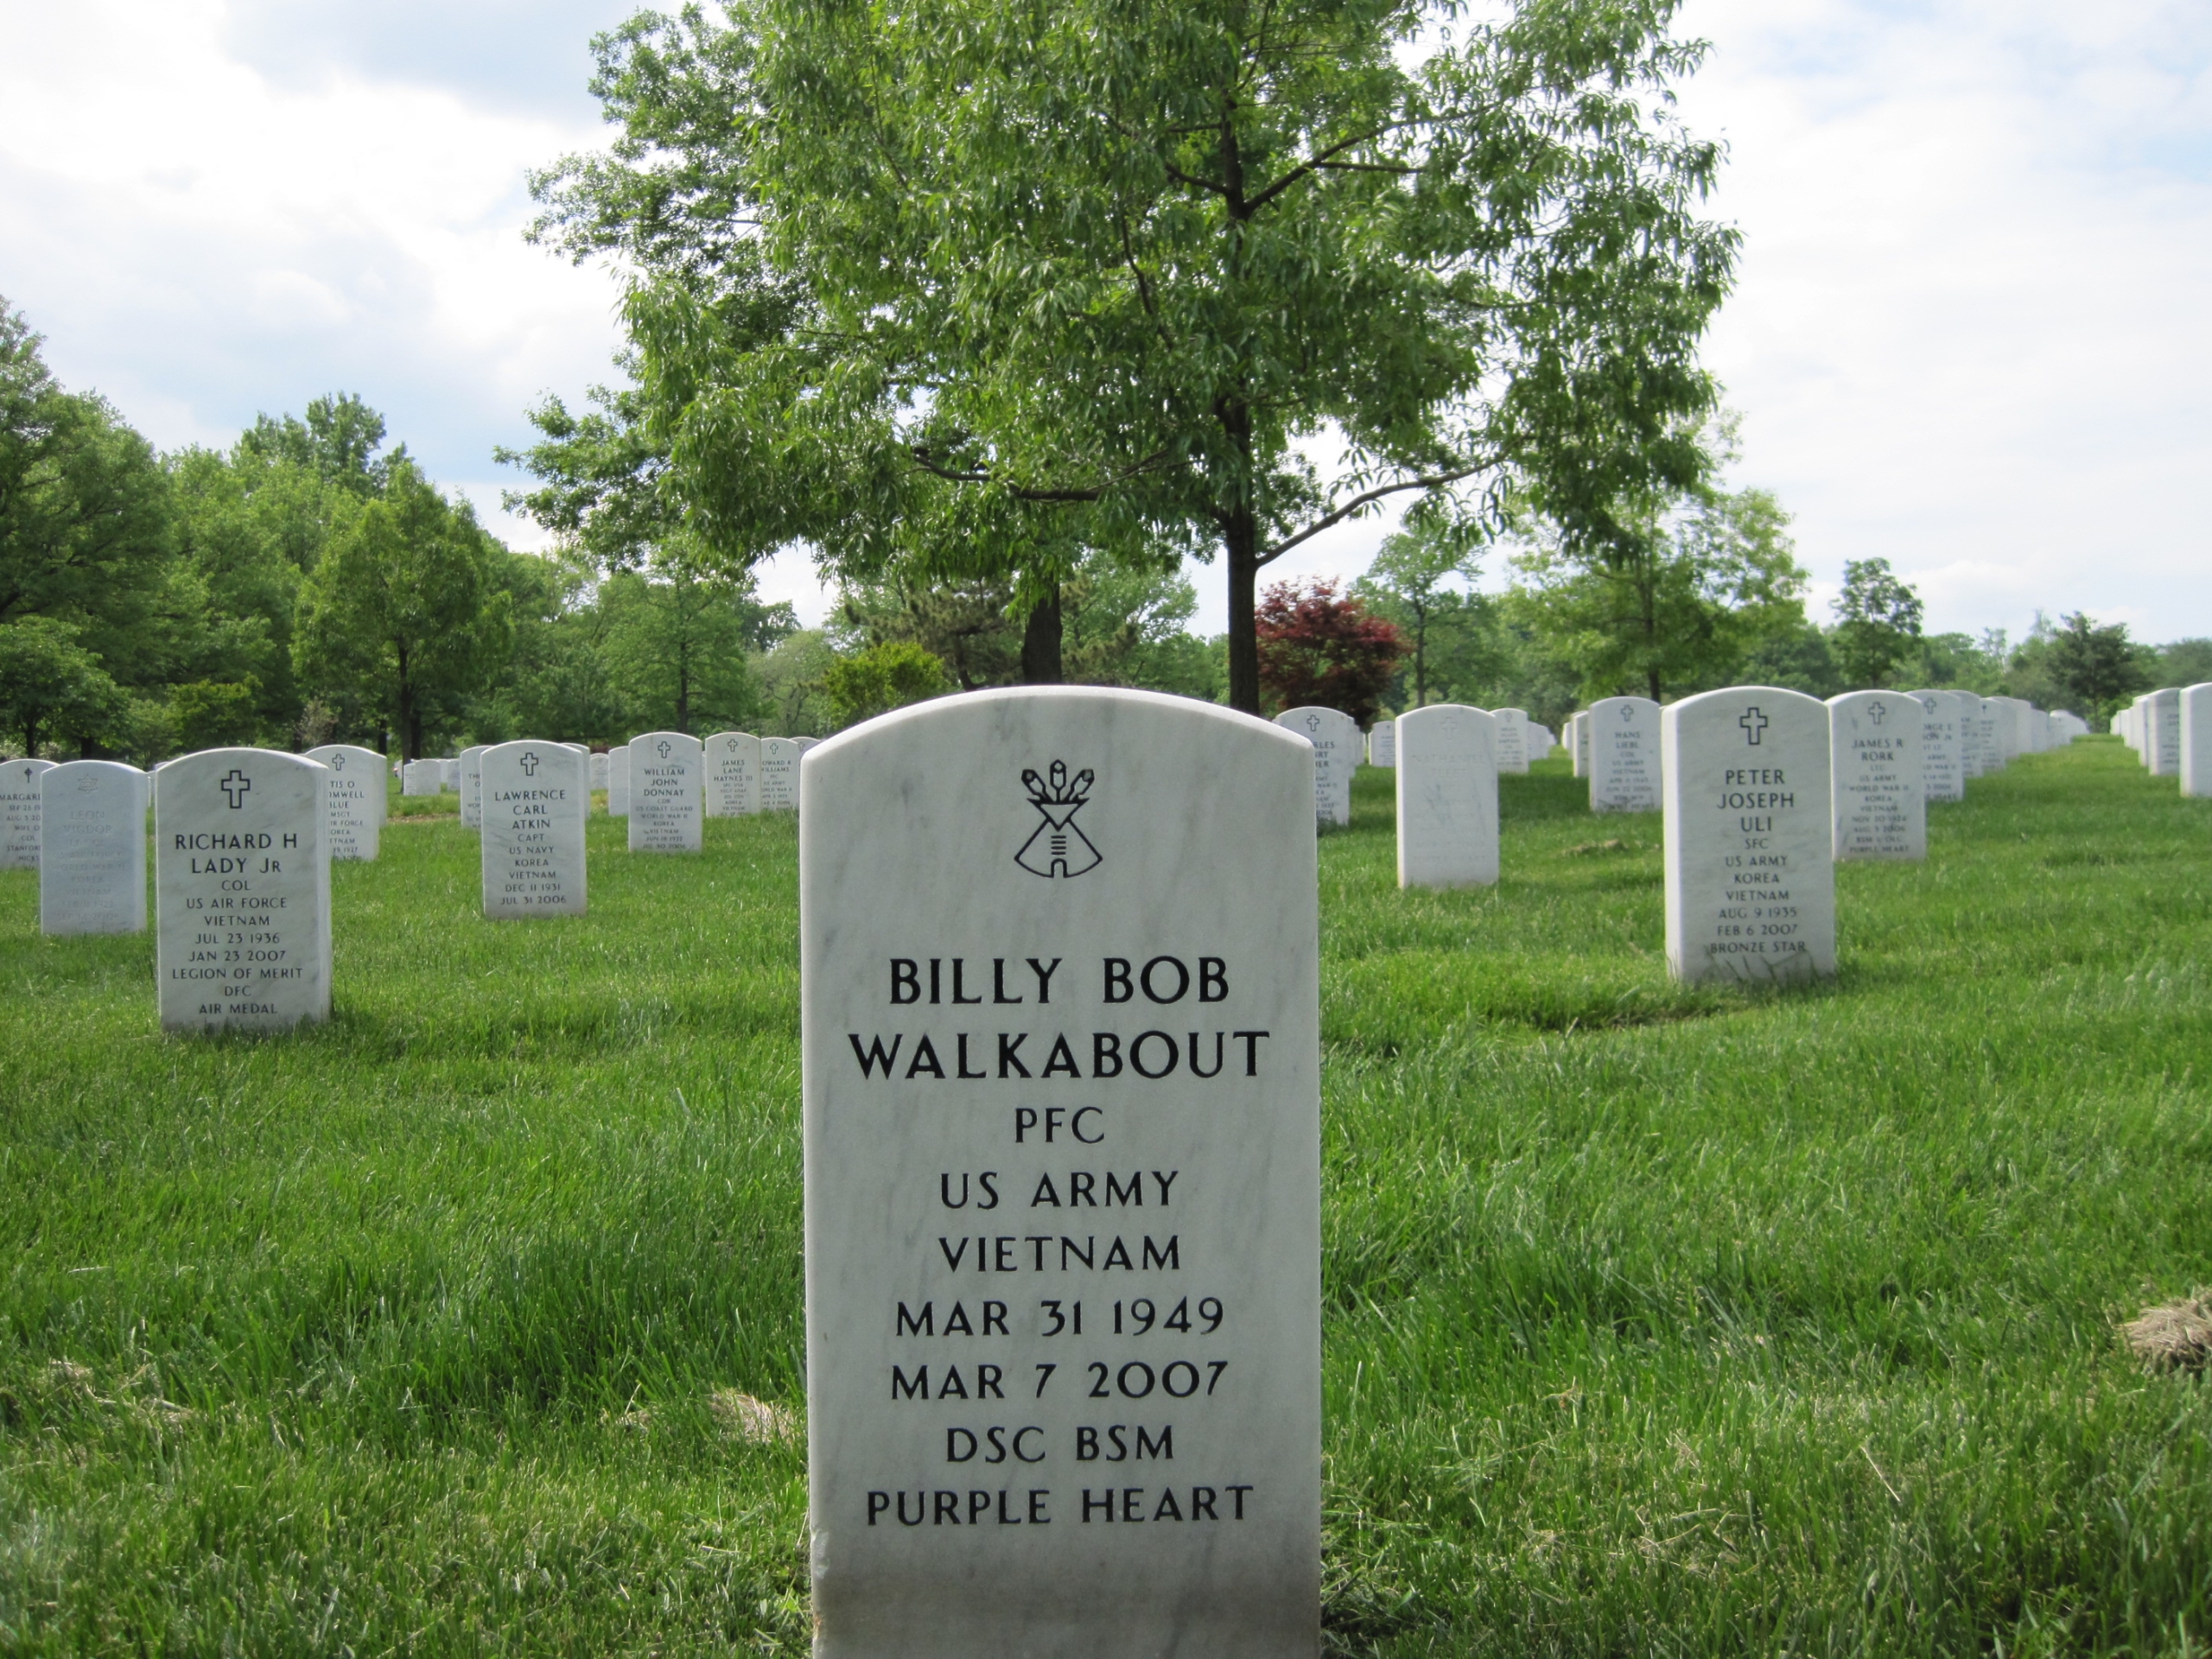 bbwalkabout-gravesite-photo-by-eileen-horan-may-2011-003